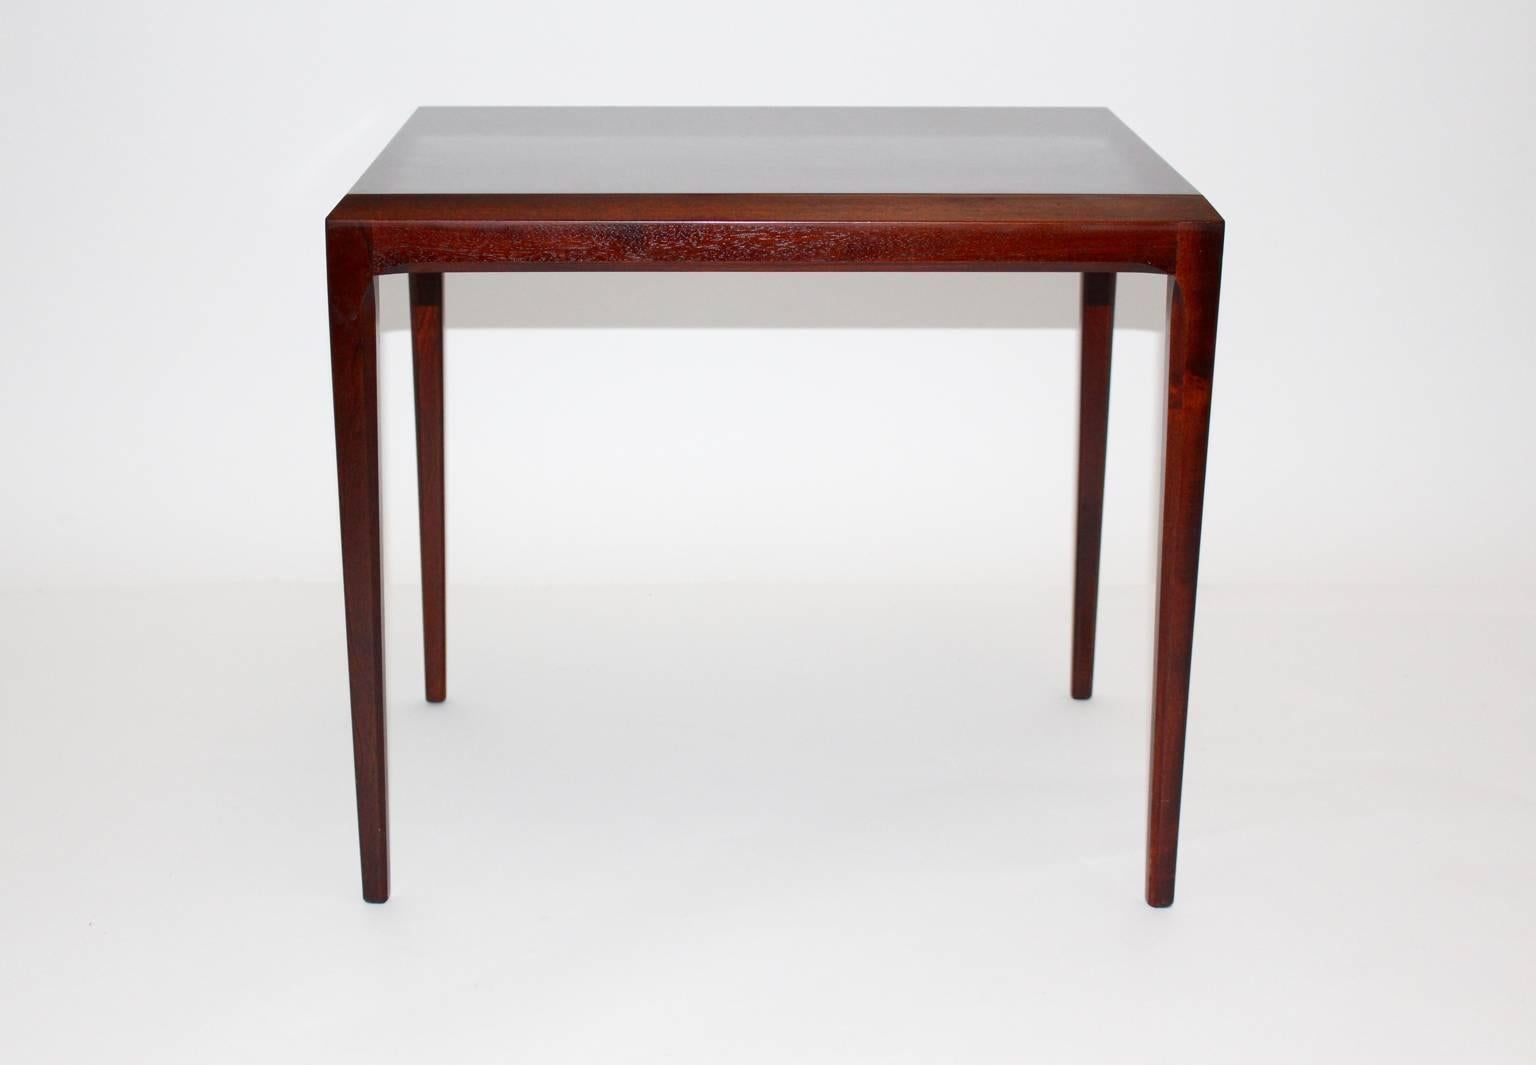 Mid Century Modern Scandinavian Modern sofa table or side table from teak designed by Johannes Andersen, circa 1963, Denmark.
A special feature are the rounded edges.
The table with rounded edges from teak and is in very good condition with minor